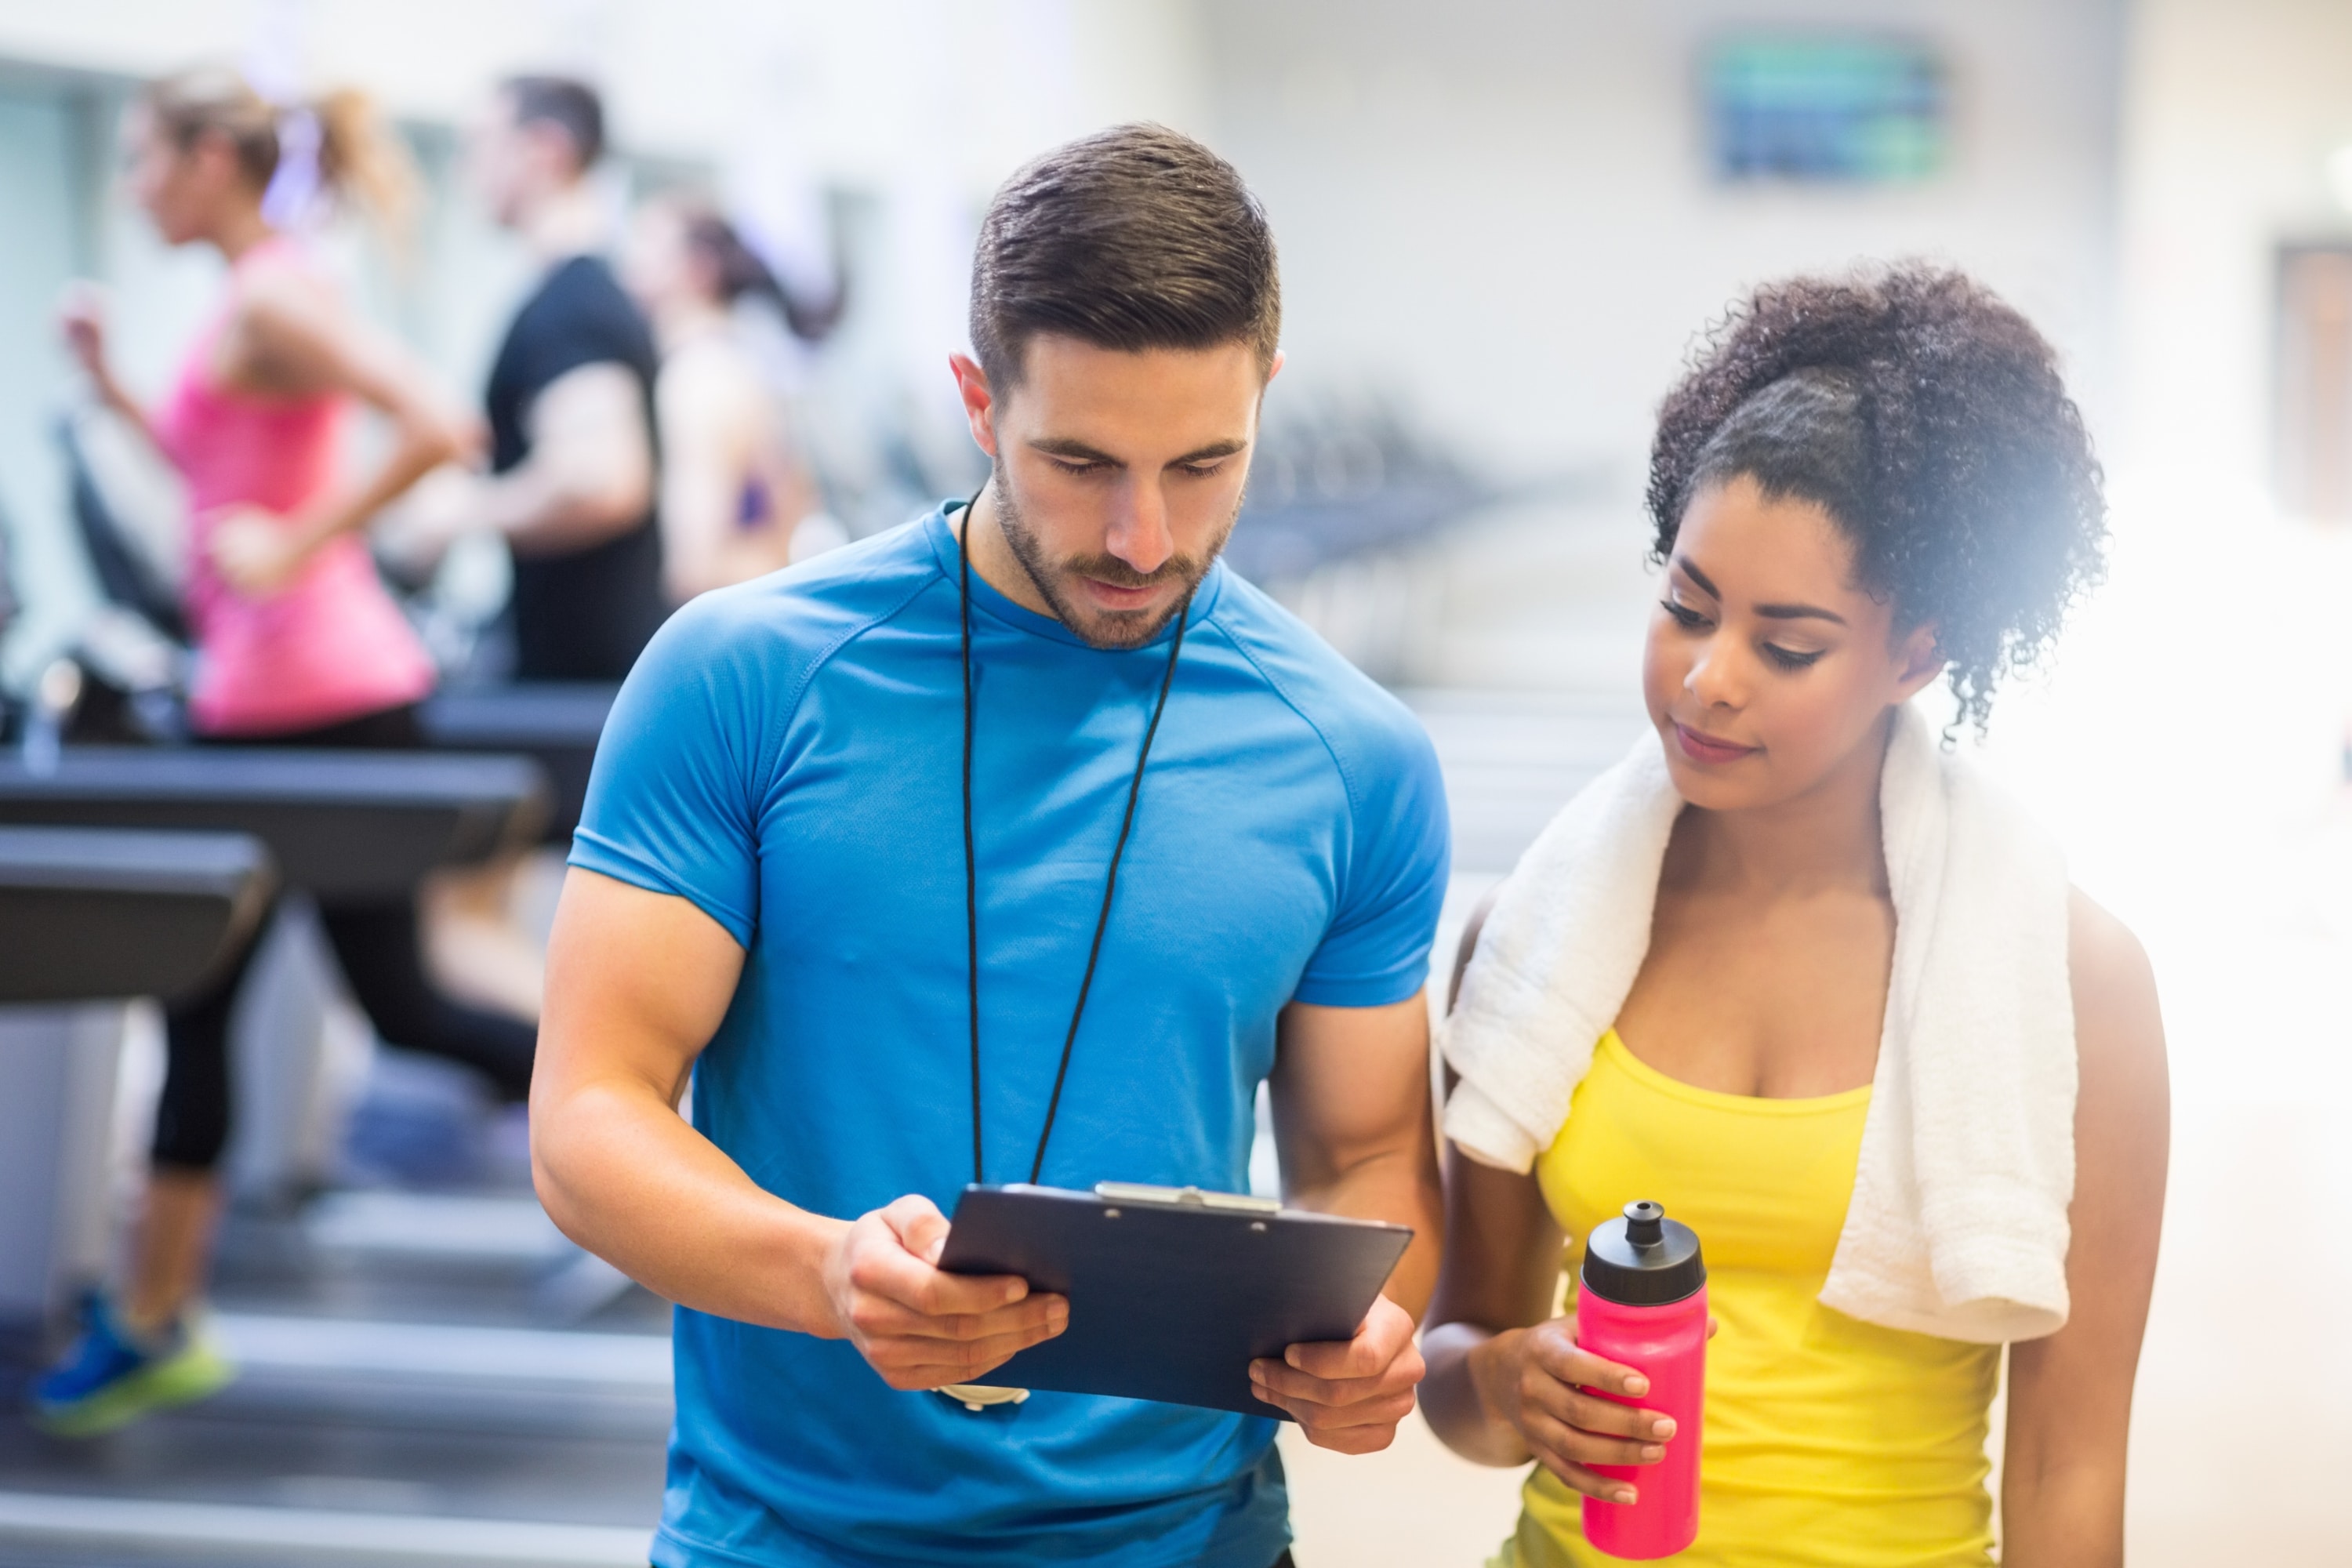 Personal Trainers: 5 Things Your Clients Should Know